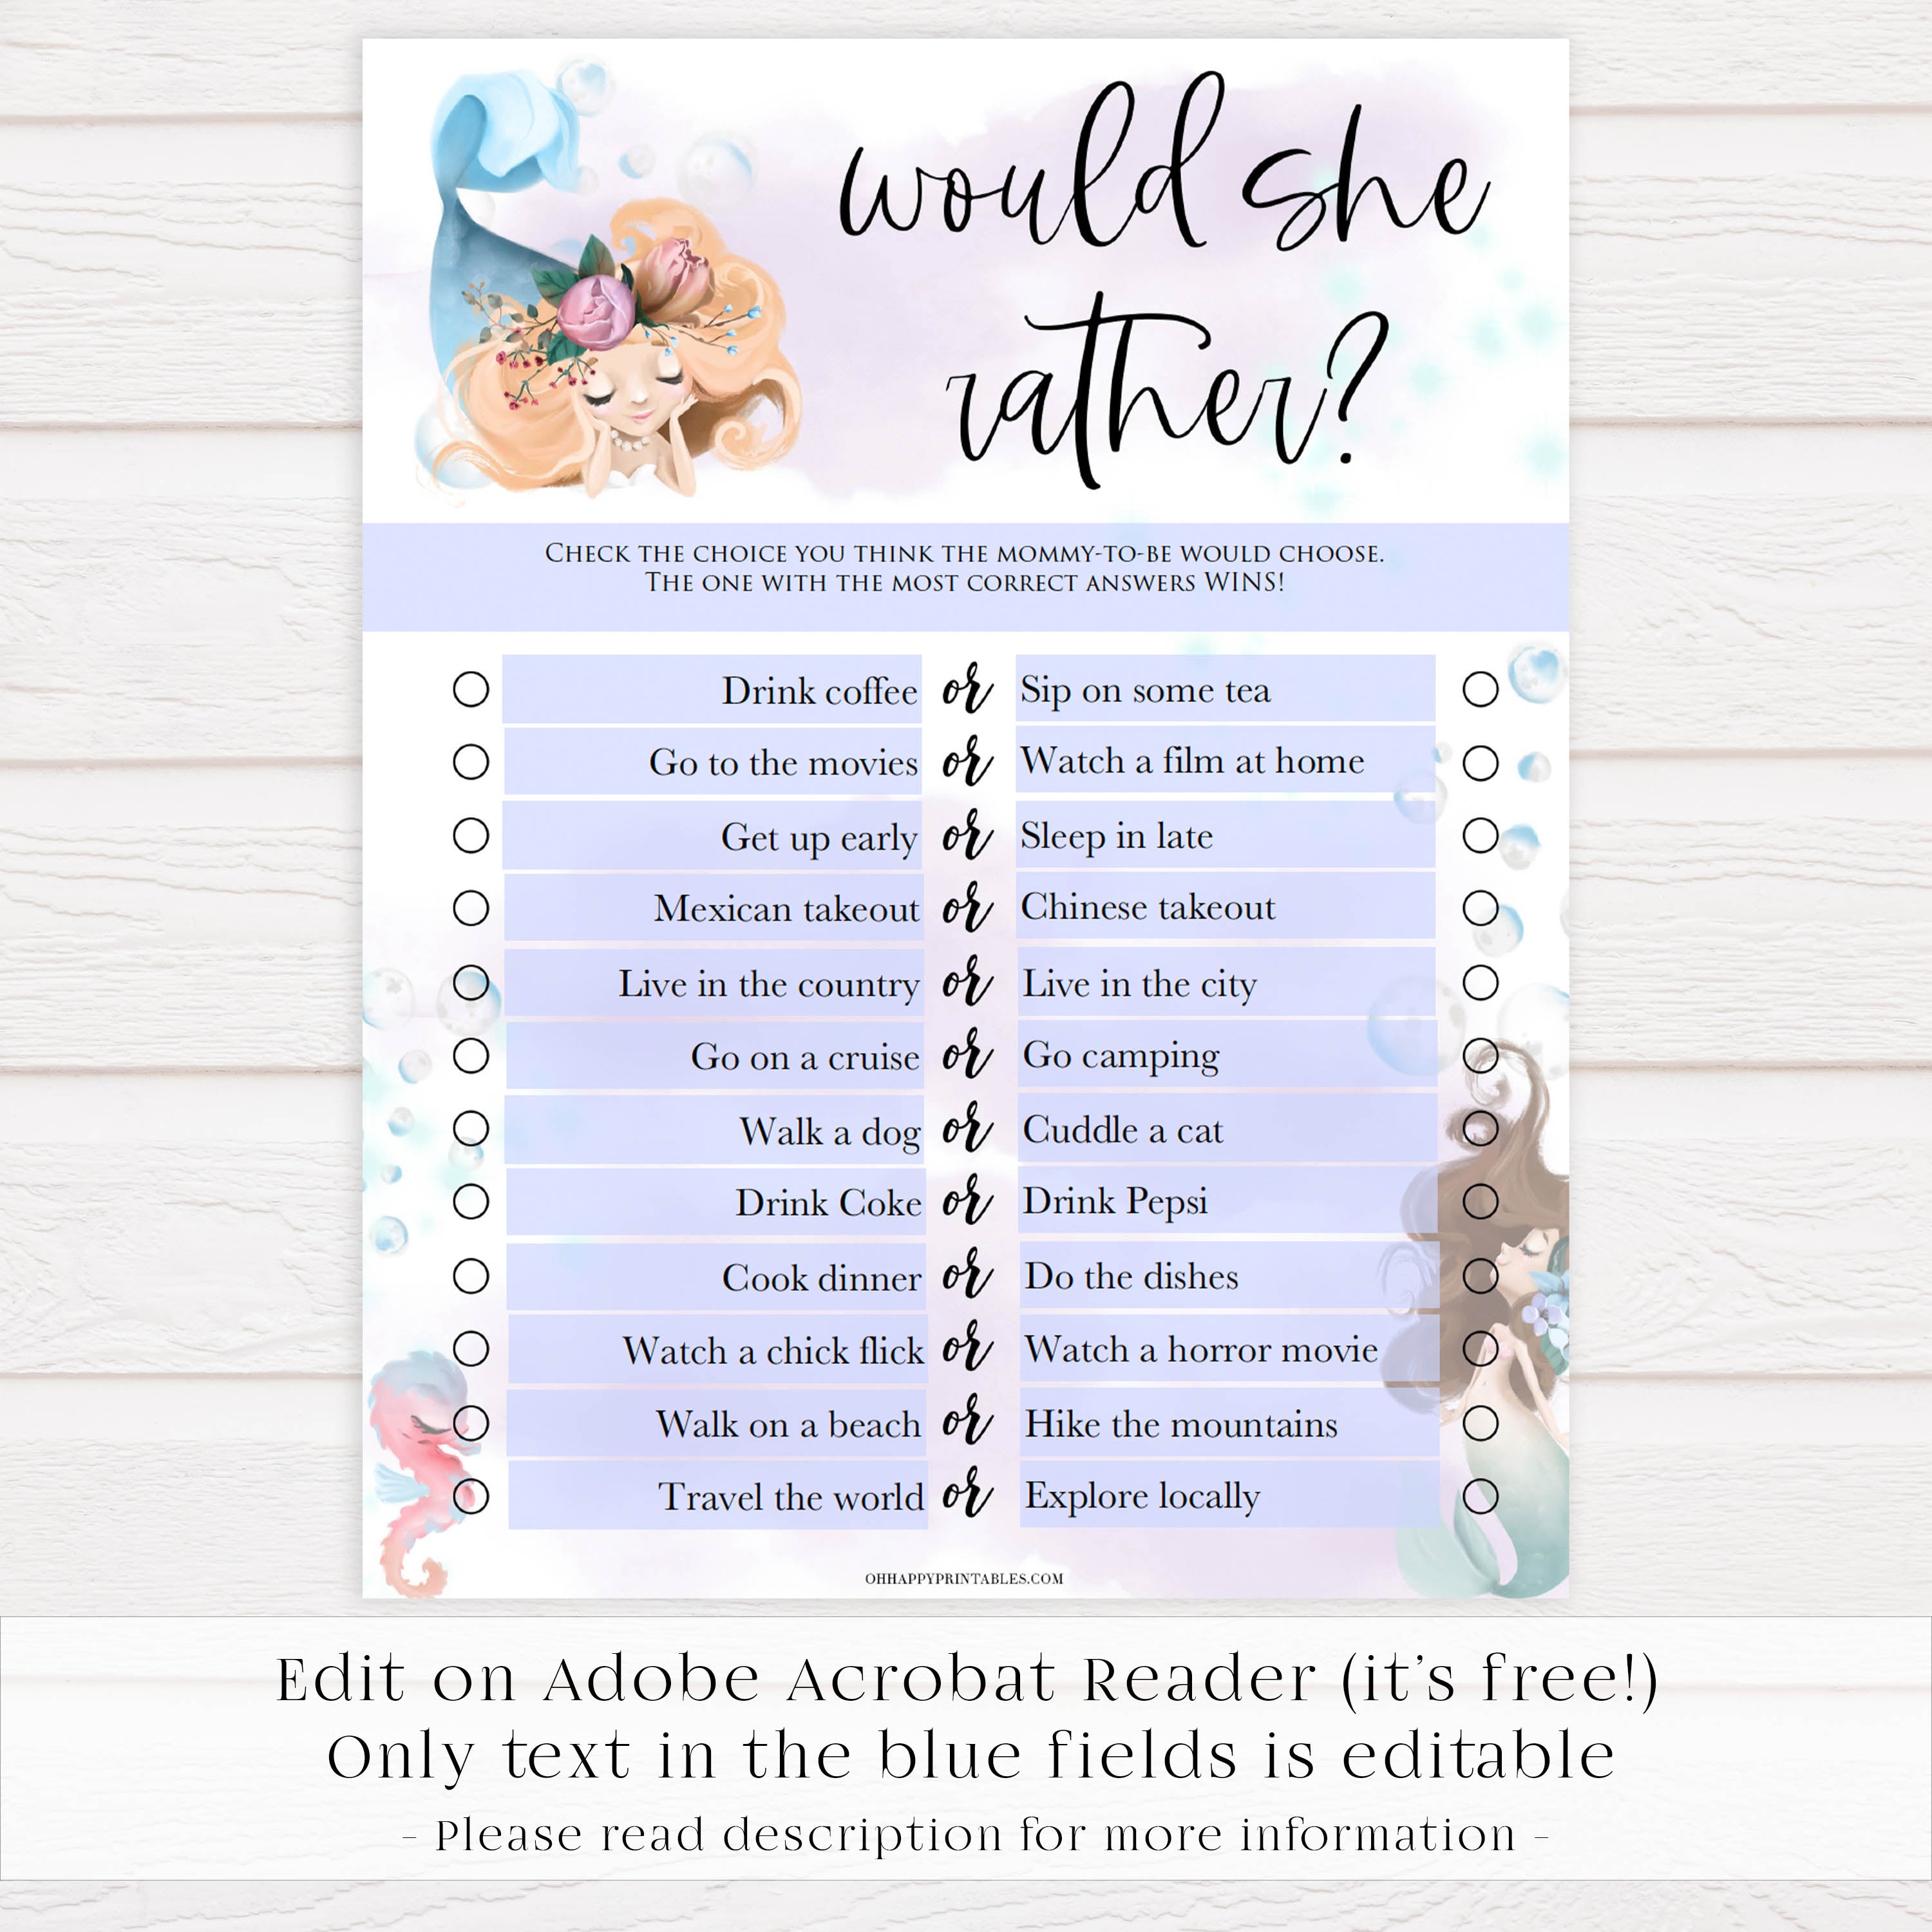 would she rather baby game, Printable baby shower games, little mermaid baby games, baby shower games, fun baby shower ideas, top baby shower ideas, little mermaid baby shower, baby shower games, pink hearts baby shower ideas